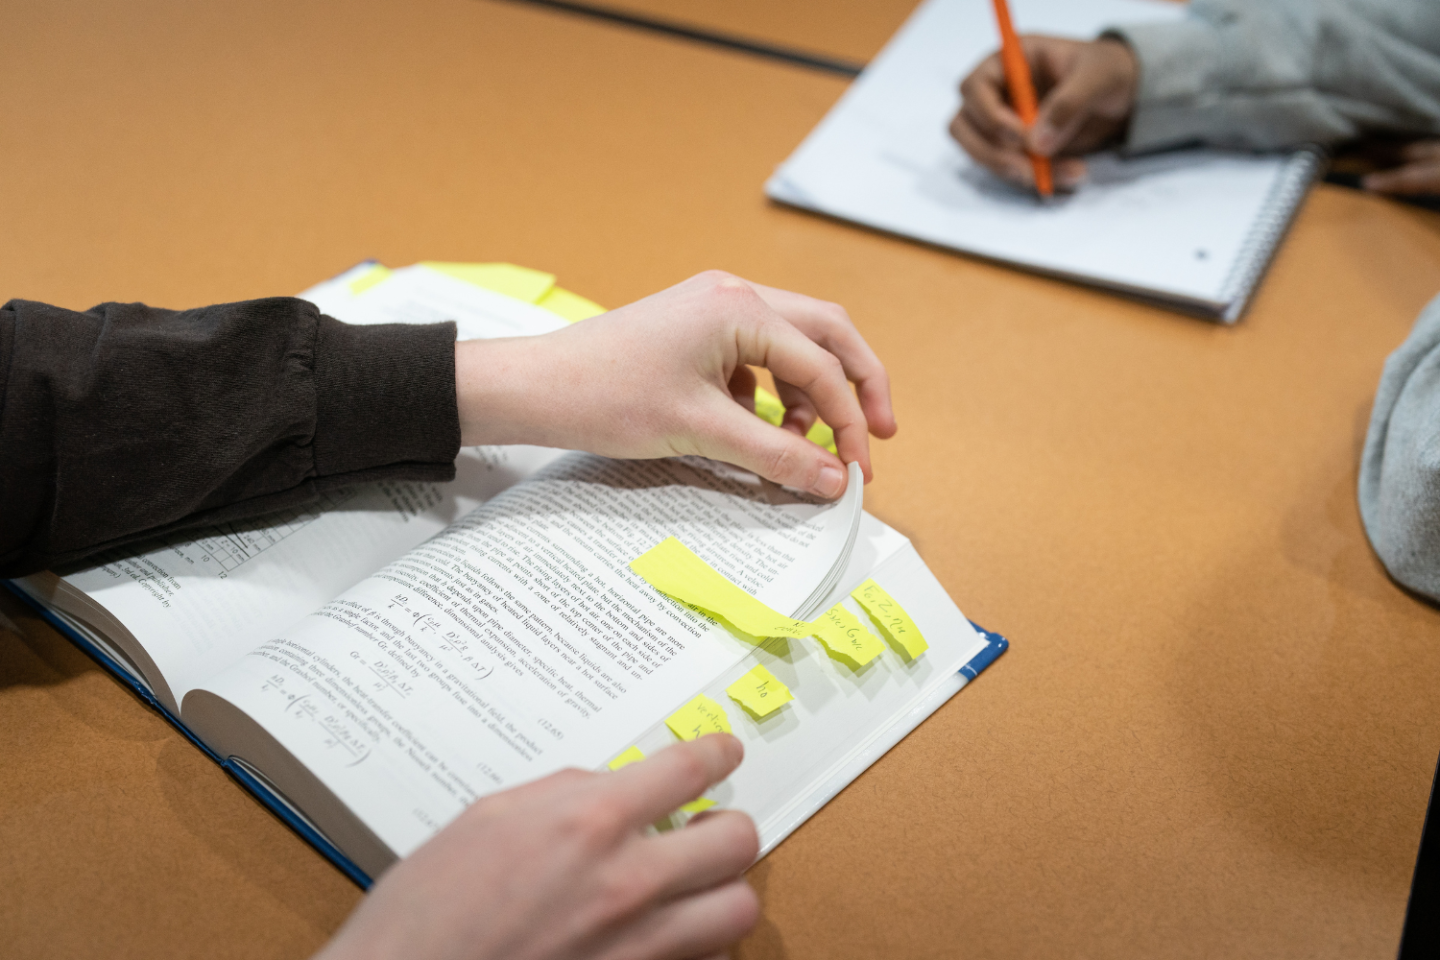 Student holding an open textbook with page markers.